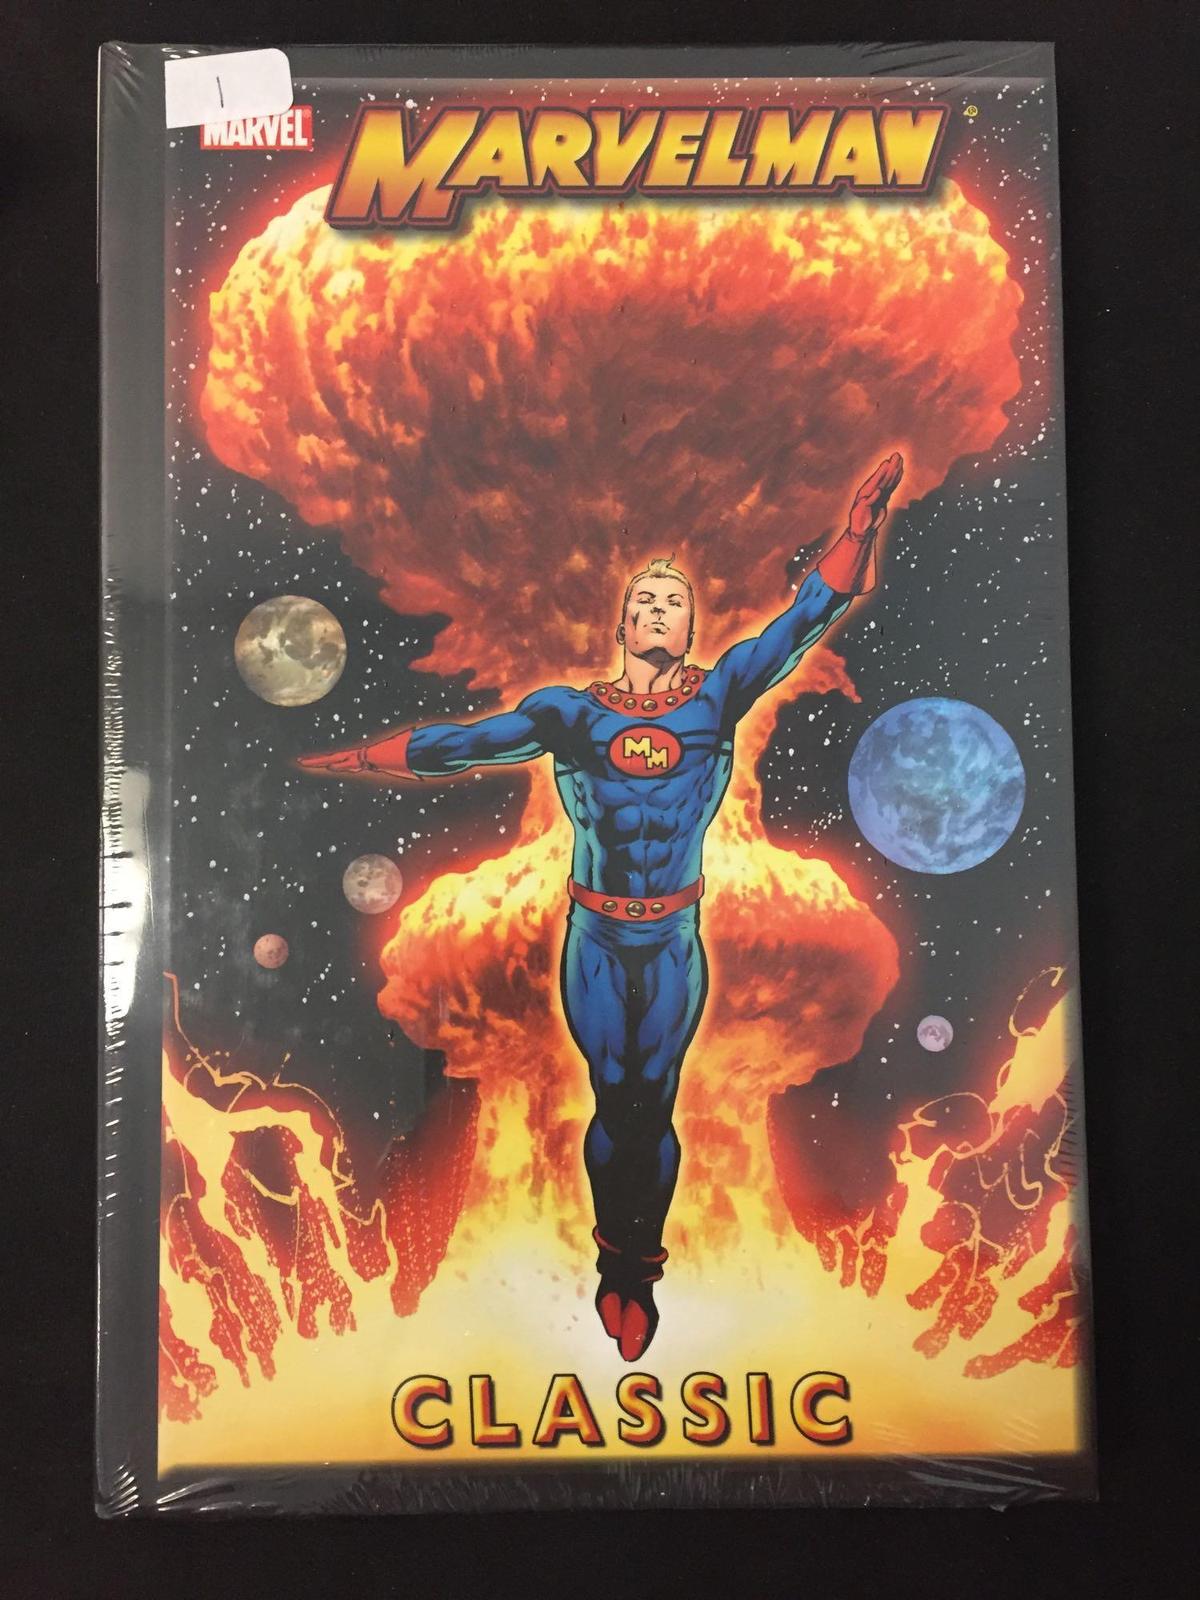 Sealed Marvelman Hardback Comic Book Graphic Novel from Collection